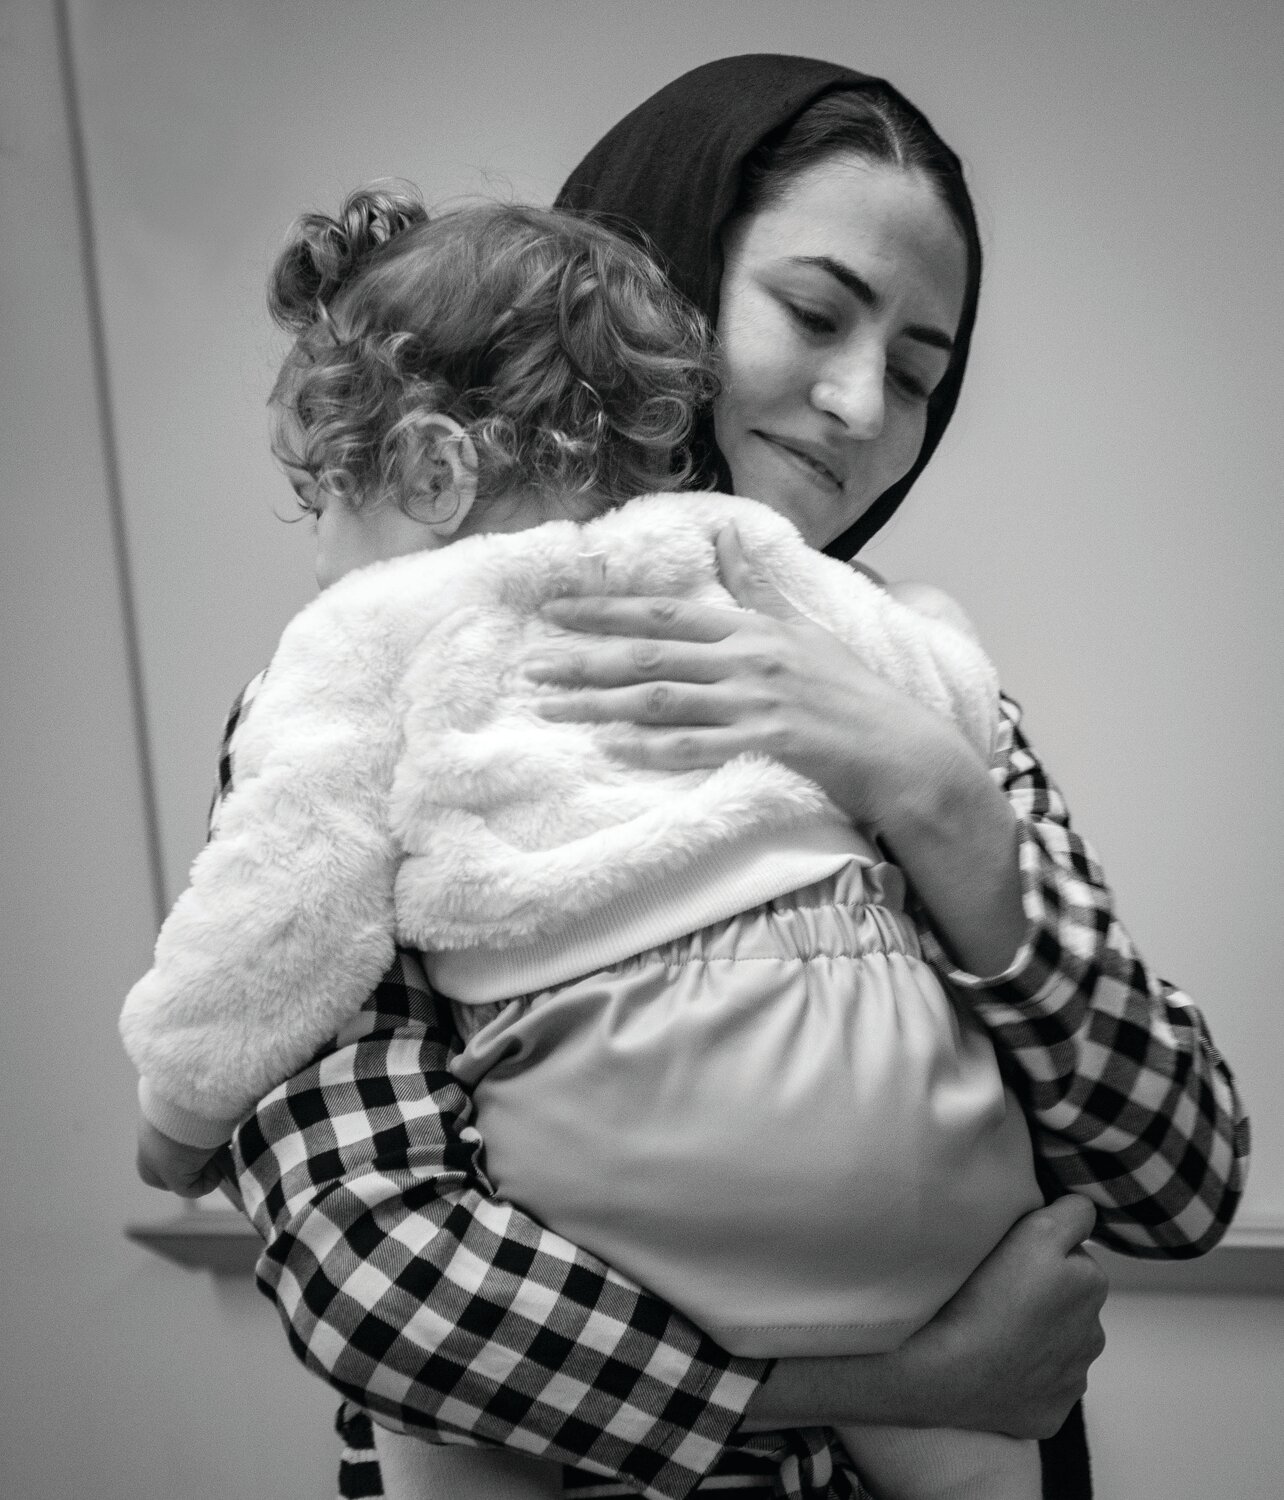 Shabana Abedy, a childcare worker, holds Asel Bayram while the little girl’s mother Derya Bayram takes part in a Family Literacy class at Vita’s Levittown location.